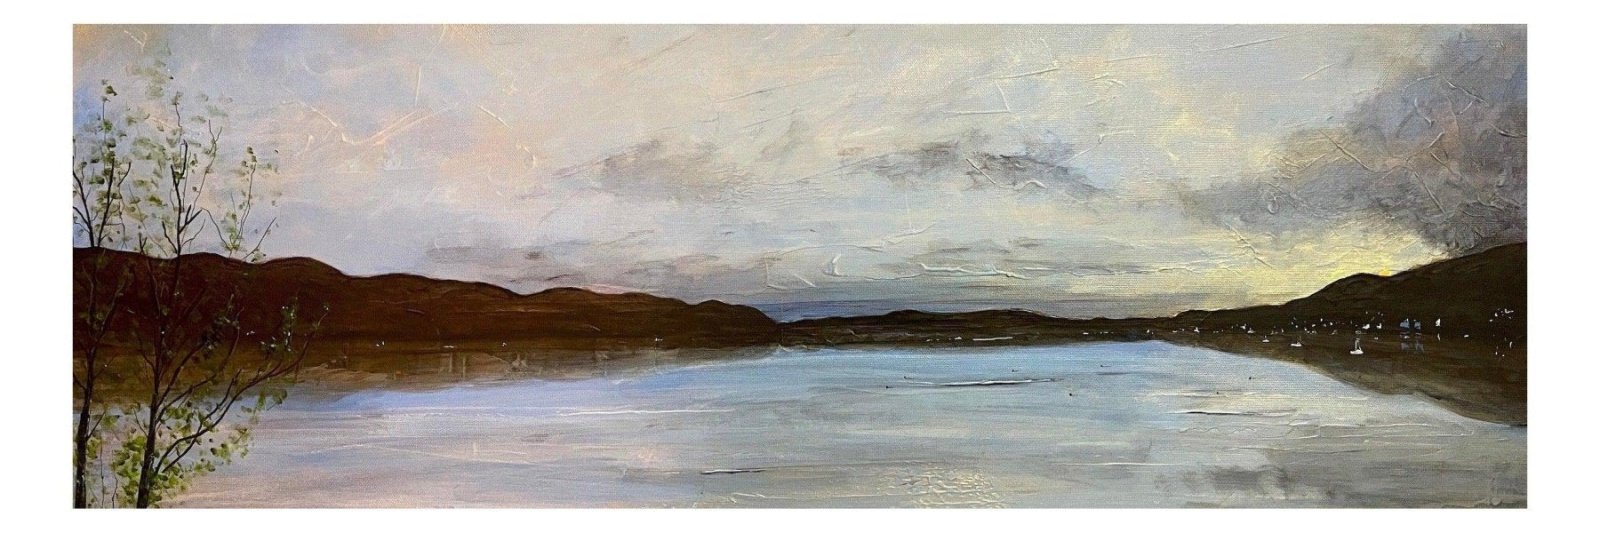 Tighnabruaich-Panoramic Prints-Scottish Highlands & Lowlands Art Gallery-Paintings, Prints, Homeware, Art Gifts From Scotland By Scottish Artist Kevin Hunter